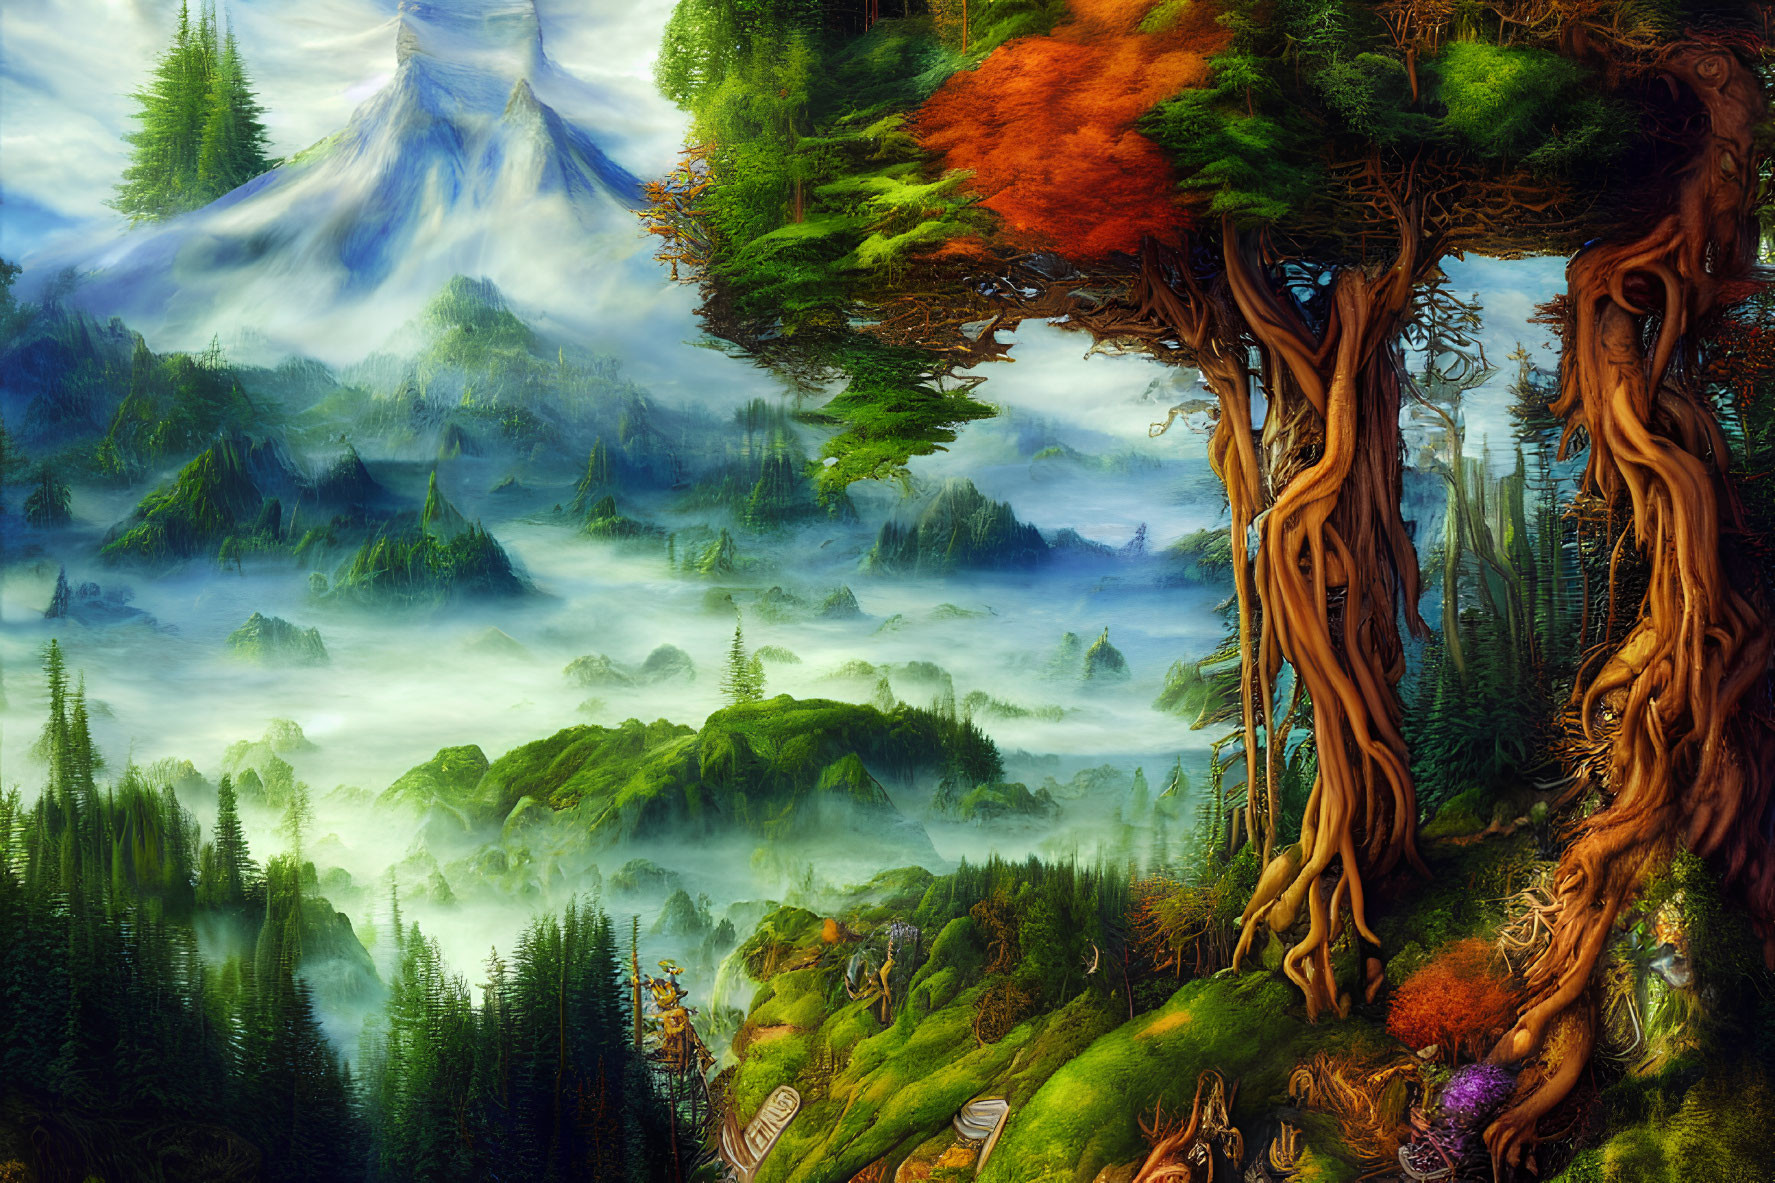 Mystical landscape with towering trees, intertwined roots, lush foliage, and misty mountains